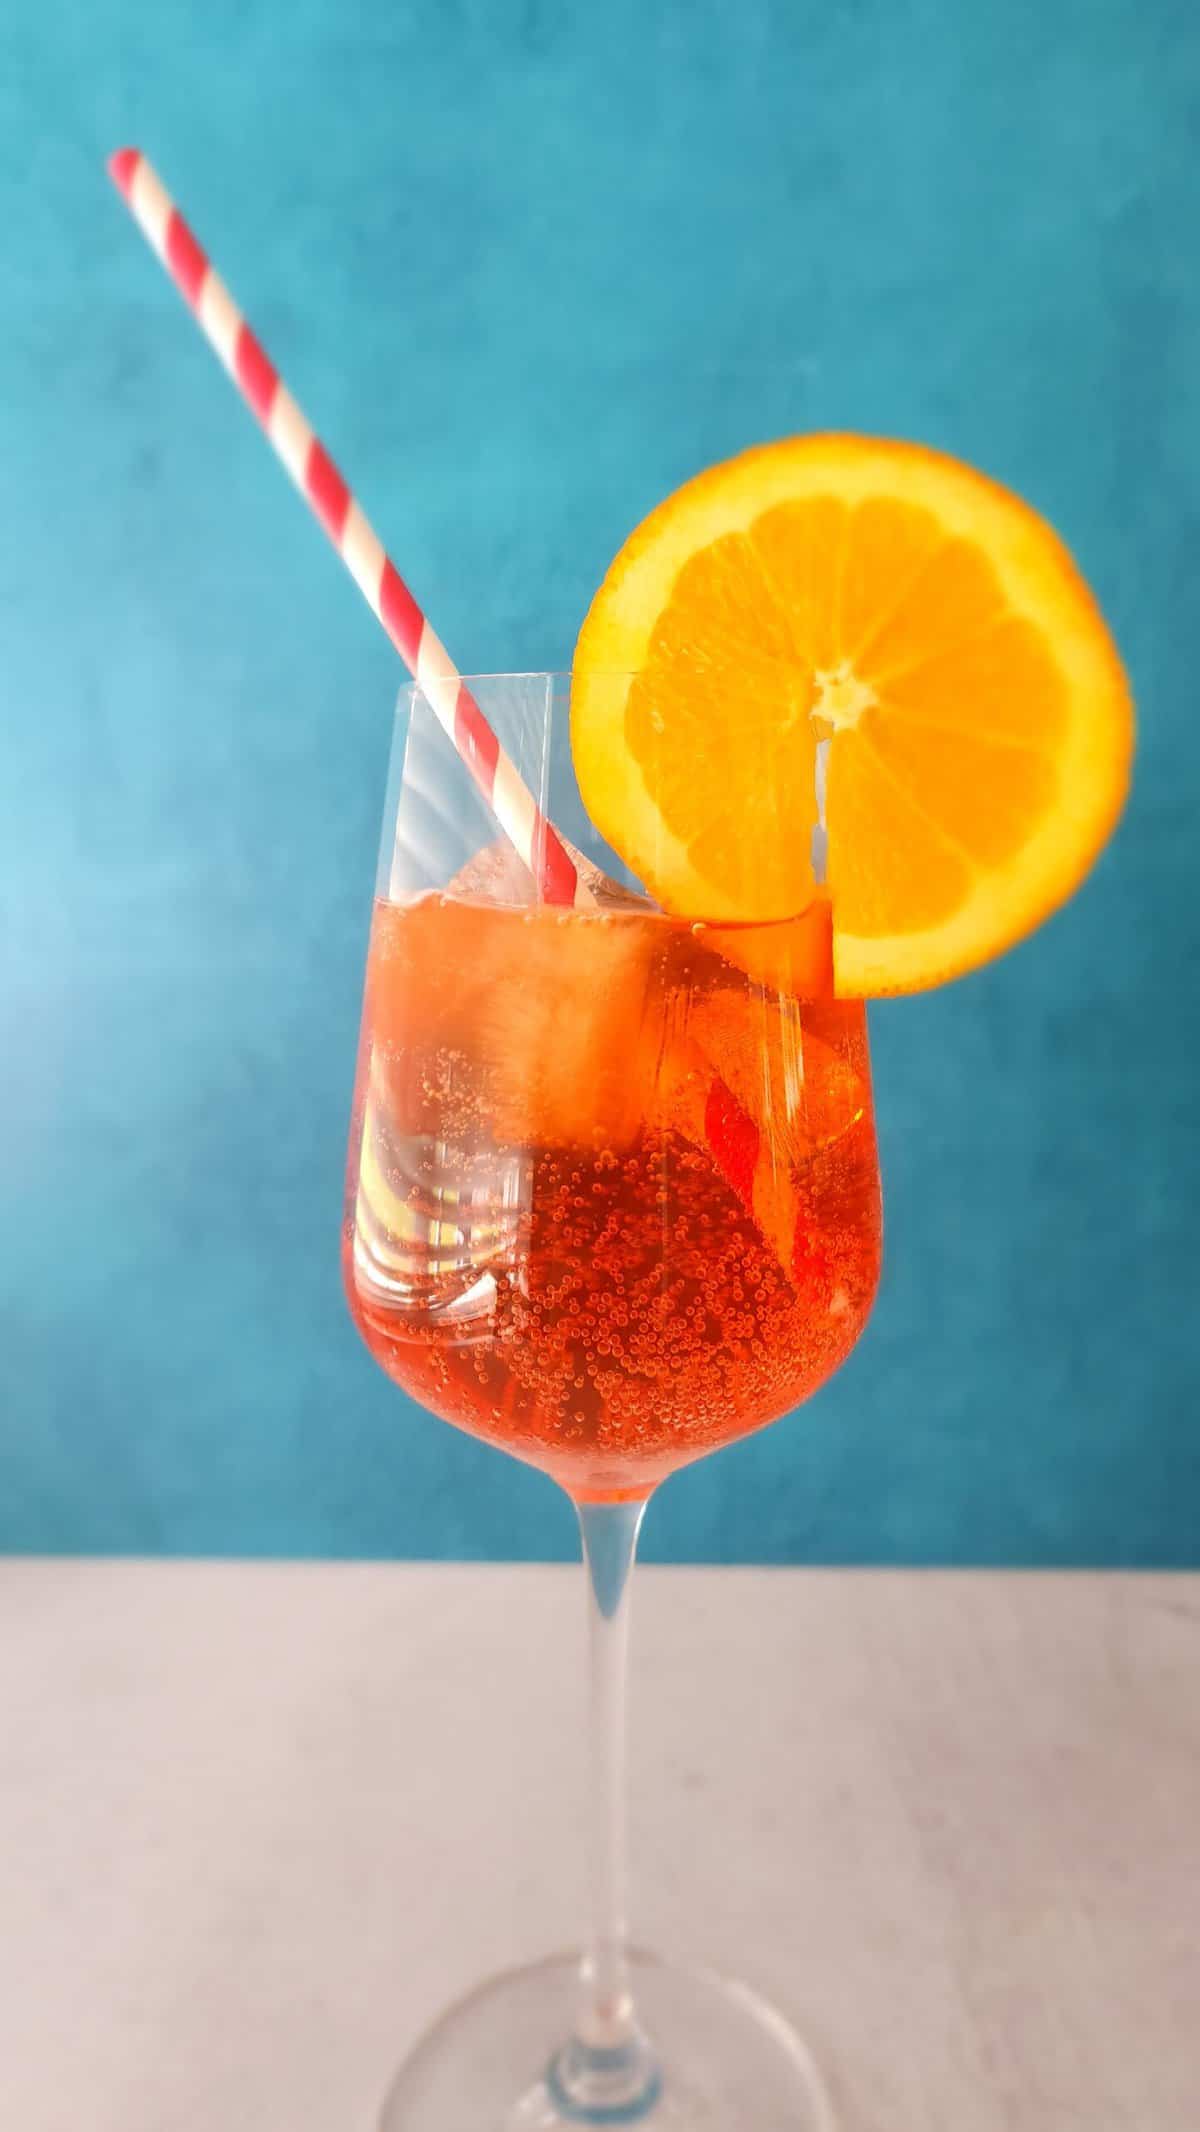 Glass of Aperol Spritz with a straw and slice of orange as garnish